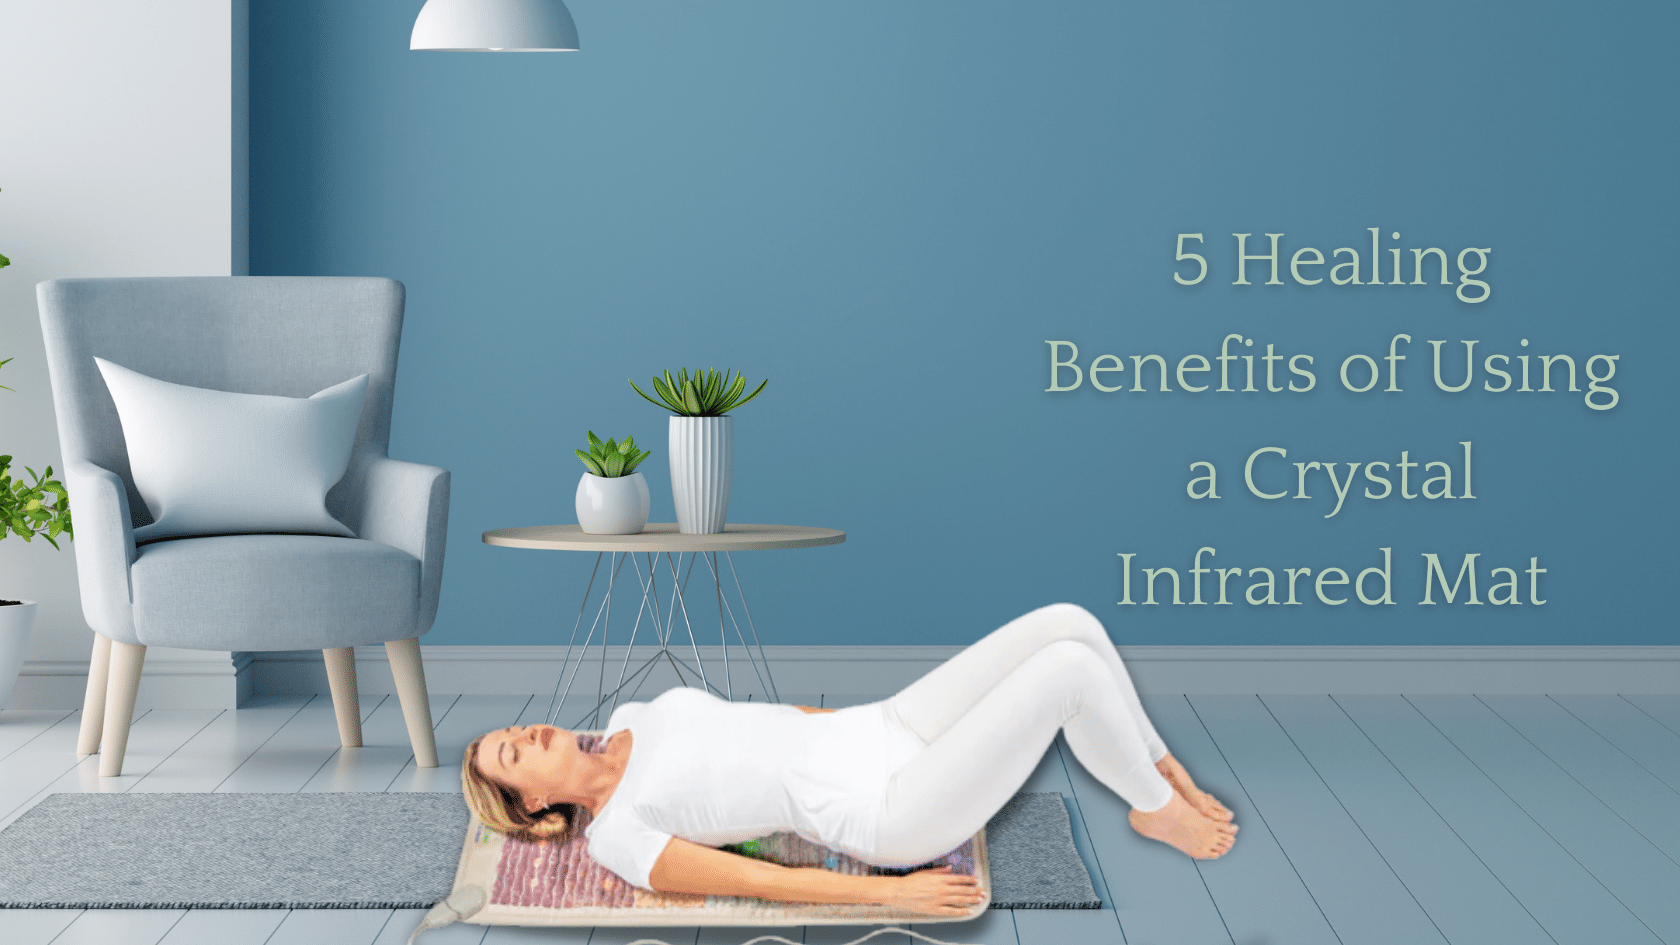 Benefits of Using a Crystal Infrared Mat